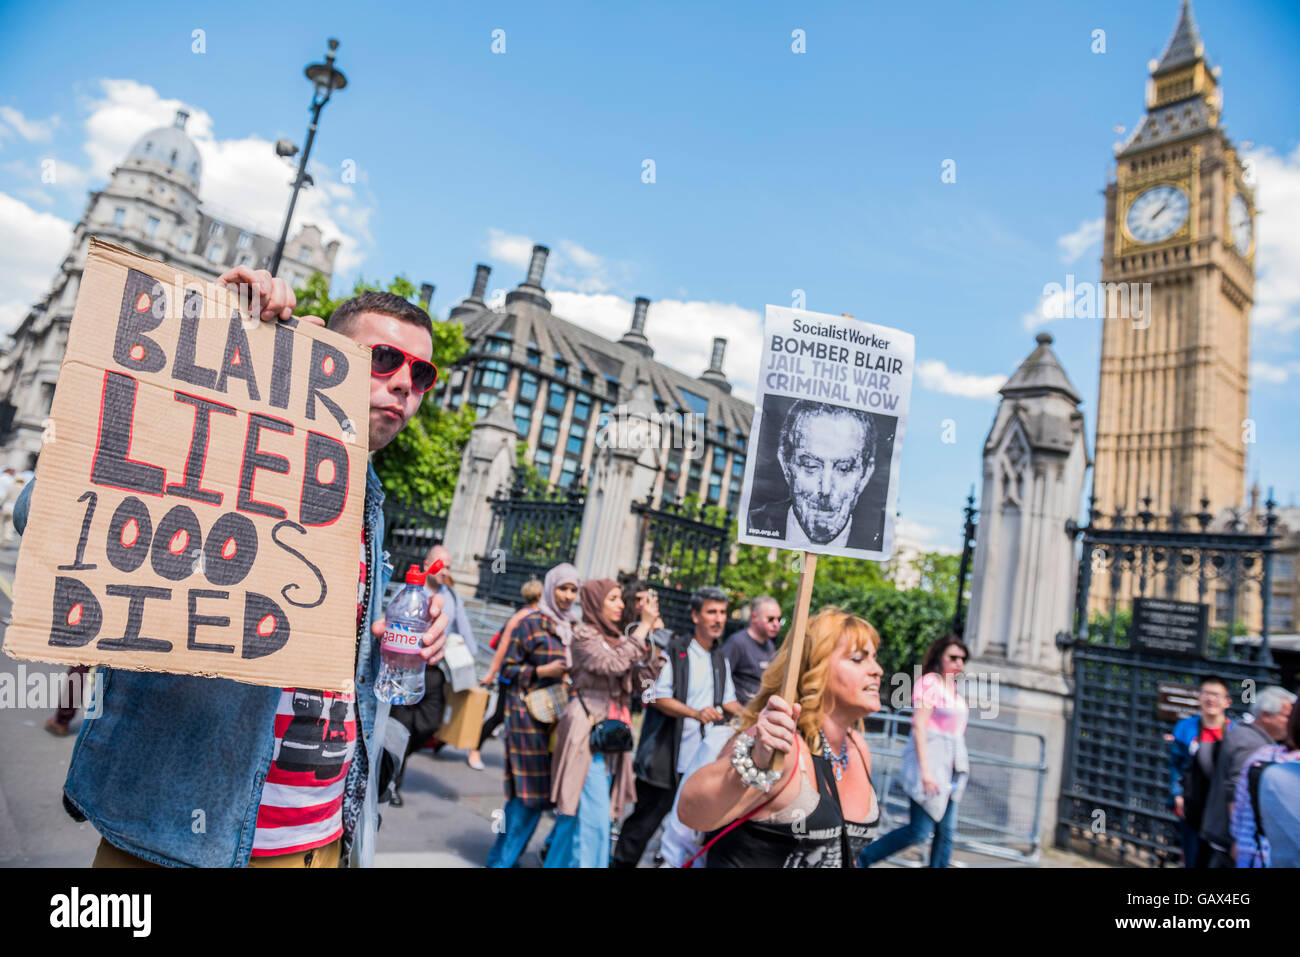 London, UK. 06th July, 2016. A couple of passionate protestors make a vocal protest in front of the gates to Parliamnet - The results of the Chilcot inquirty into the Iraq War bring protestors, against Tony Blair's part in it, to Parliament Square. Credit:  Guy Bell/Alamy Live News Stock Photo